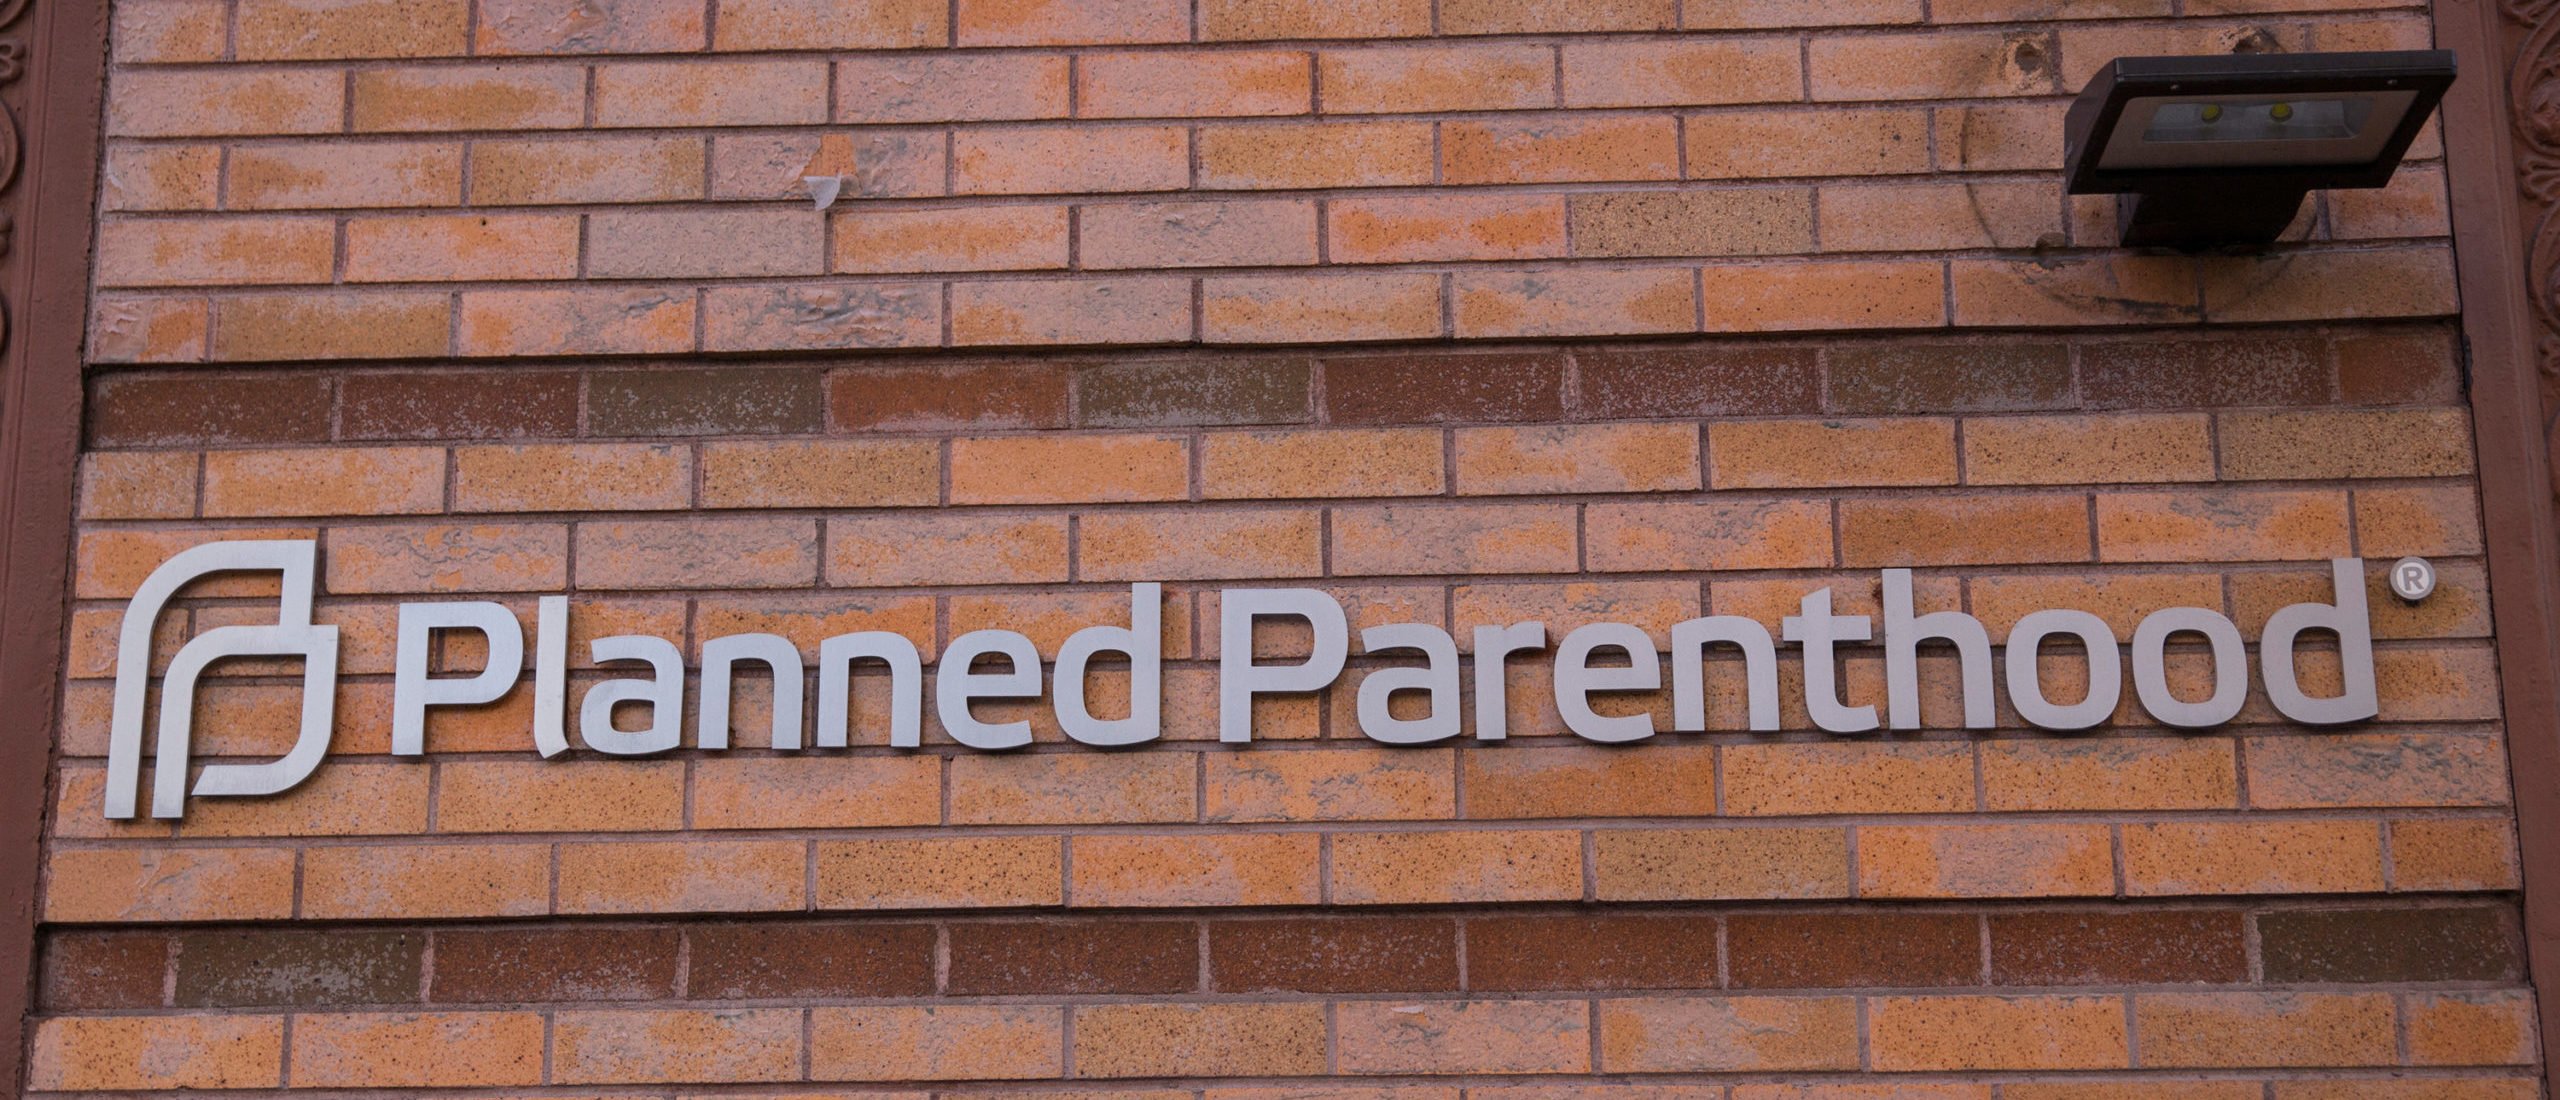 A Planned Parenthood office is seen on November 30, 2015 in New York City. (Photo by Andrew Burton/Getty Images)